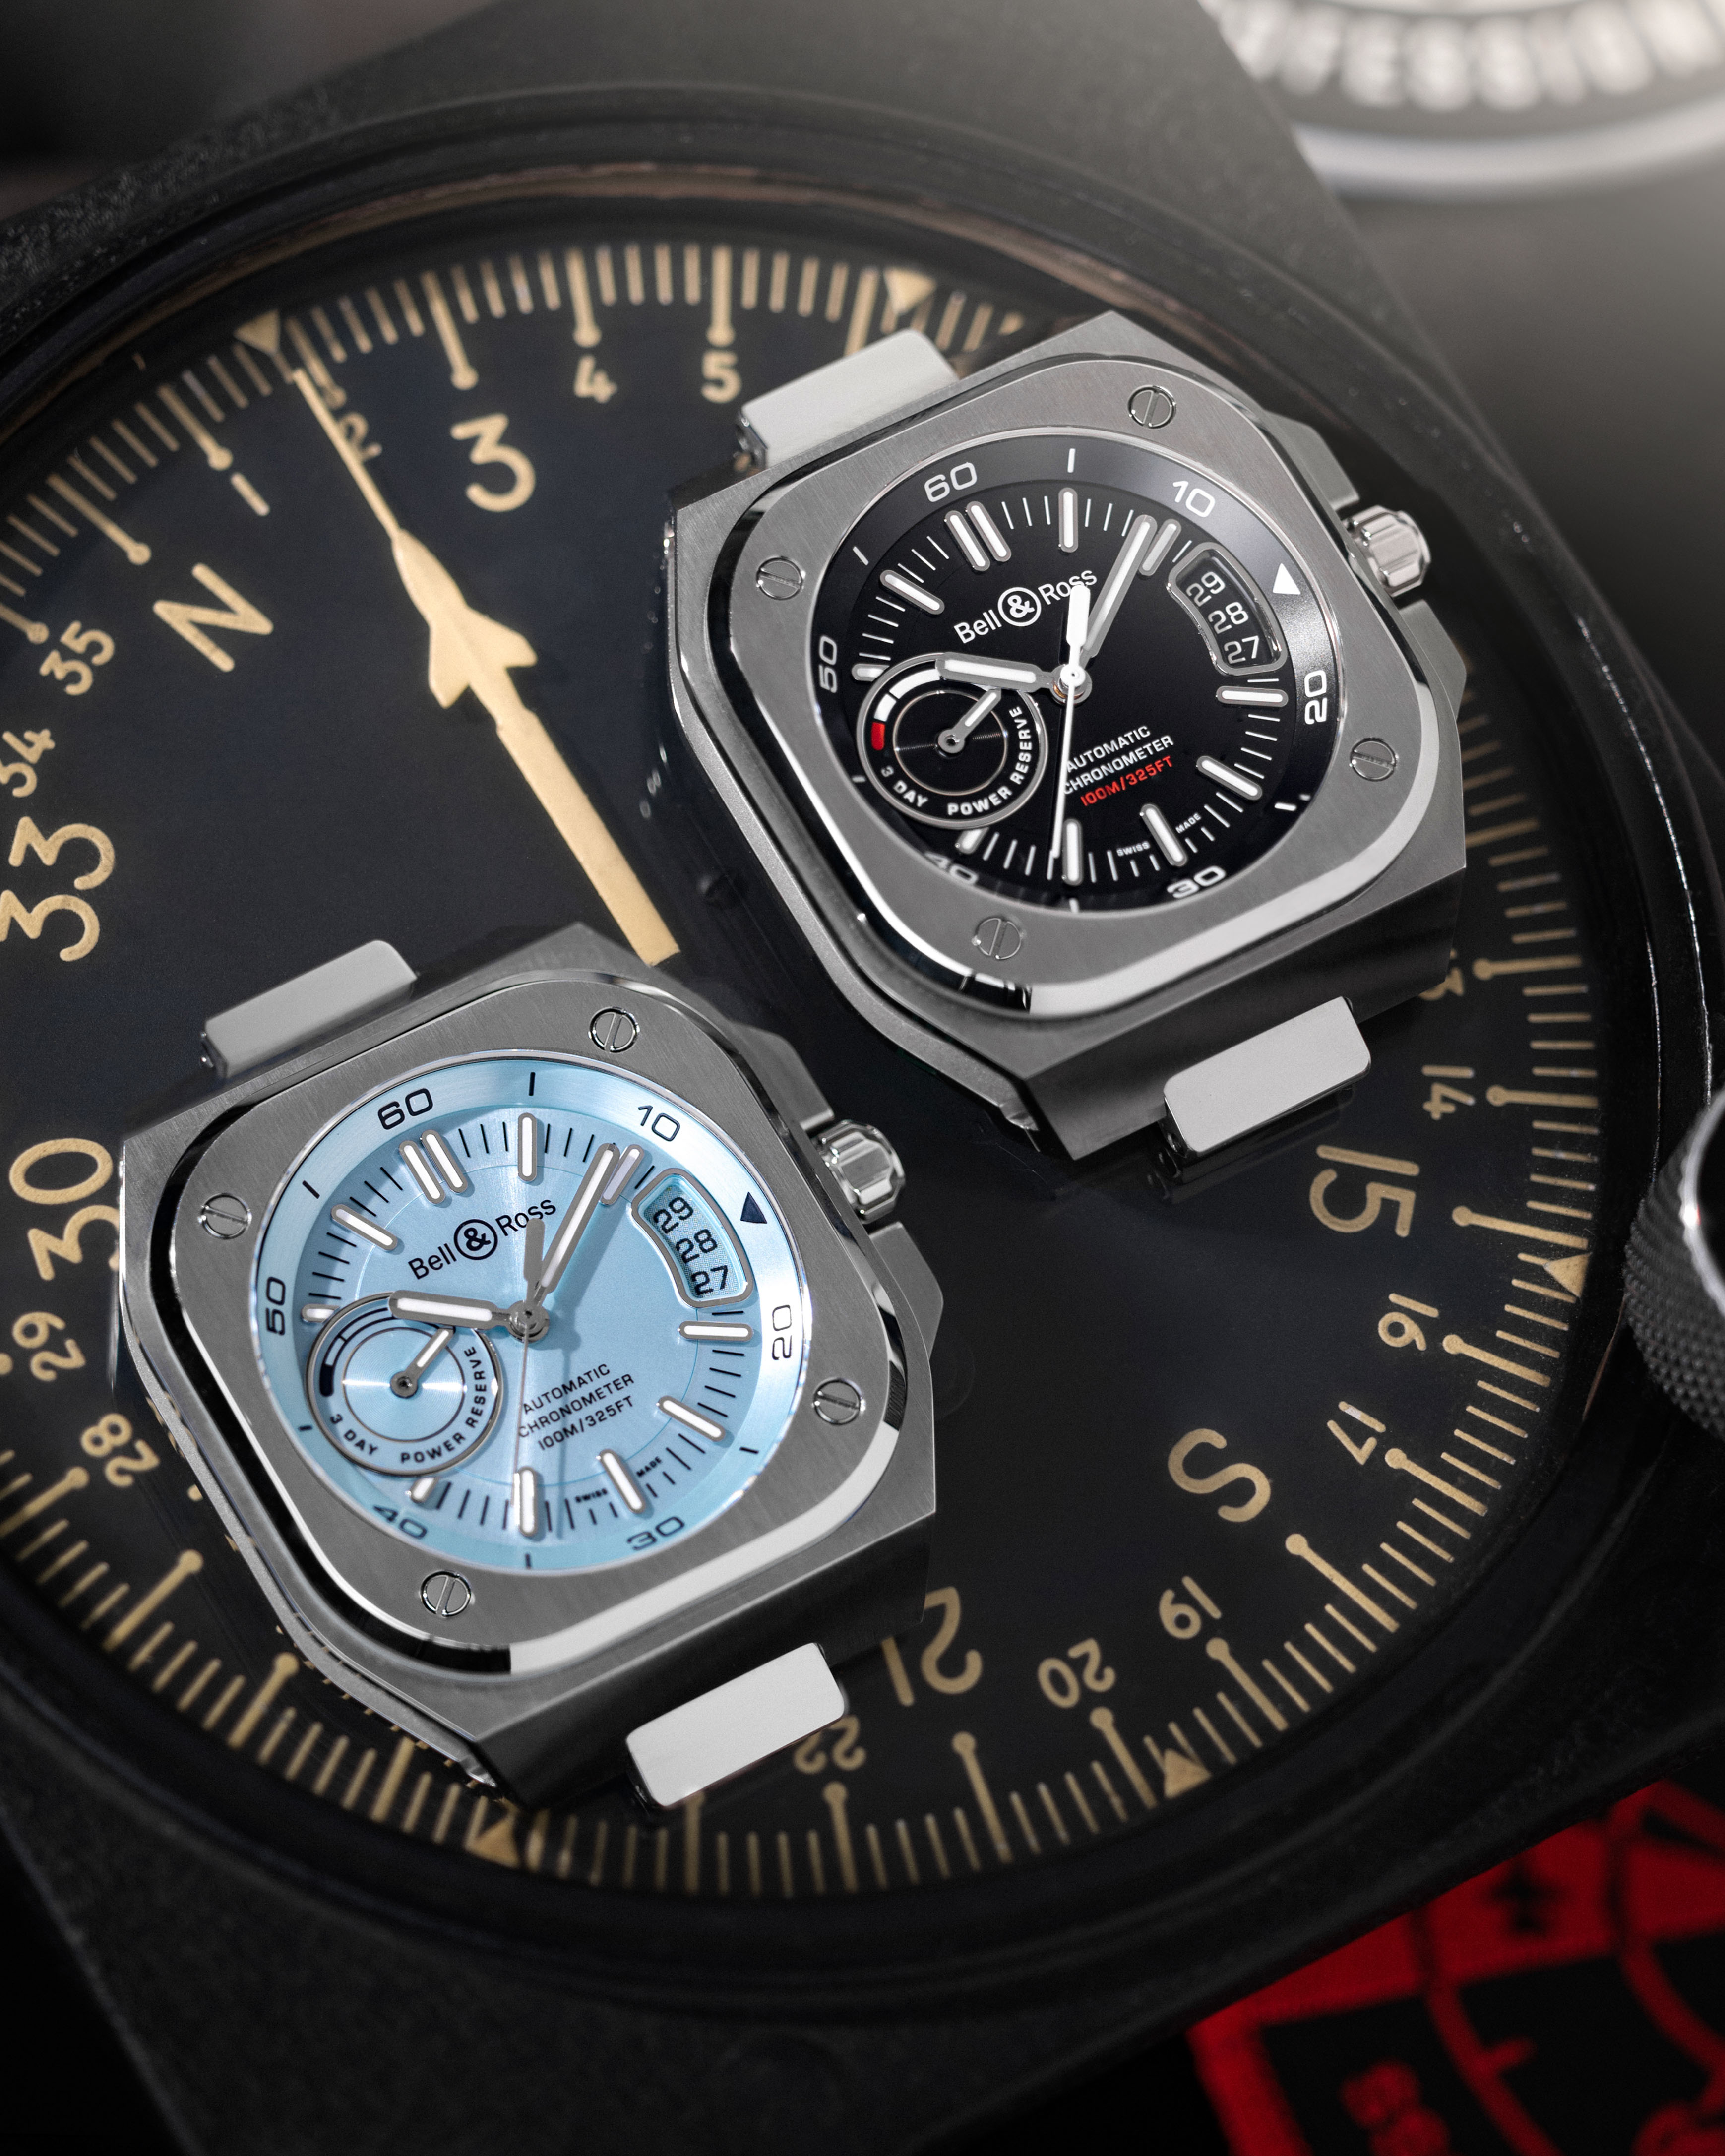 Product Highlight: Bell & Ross BR-X5